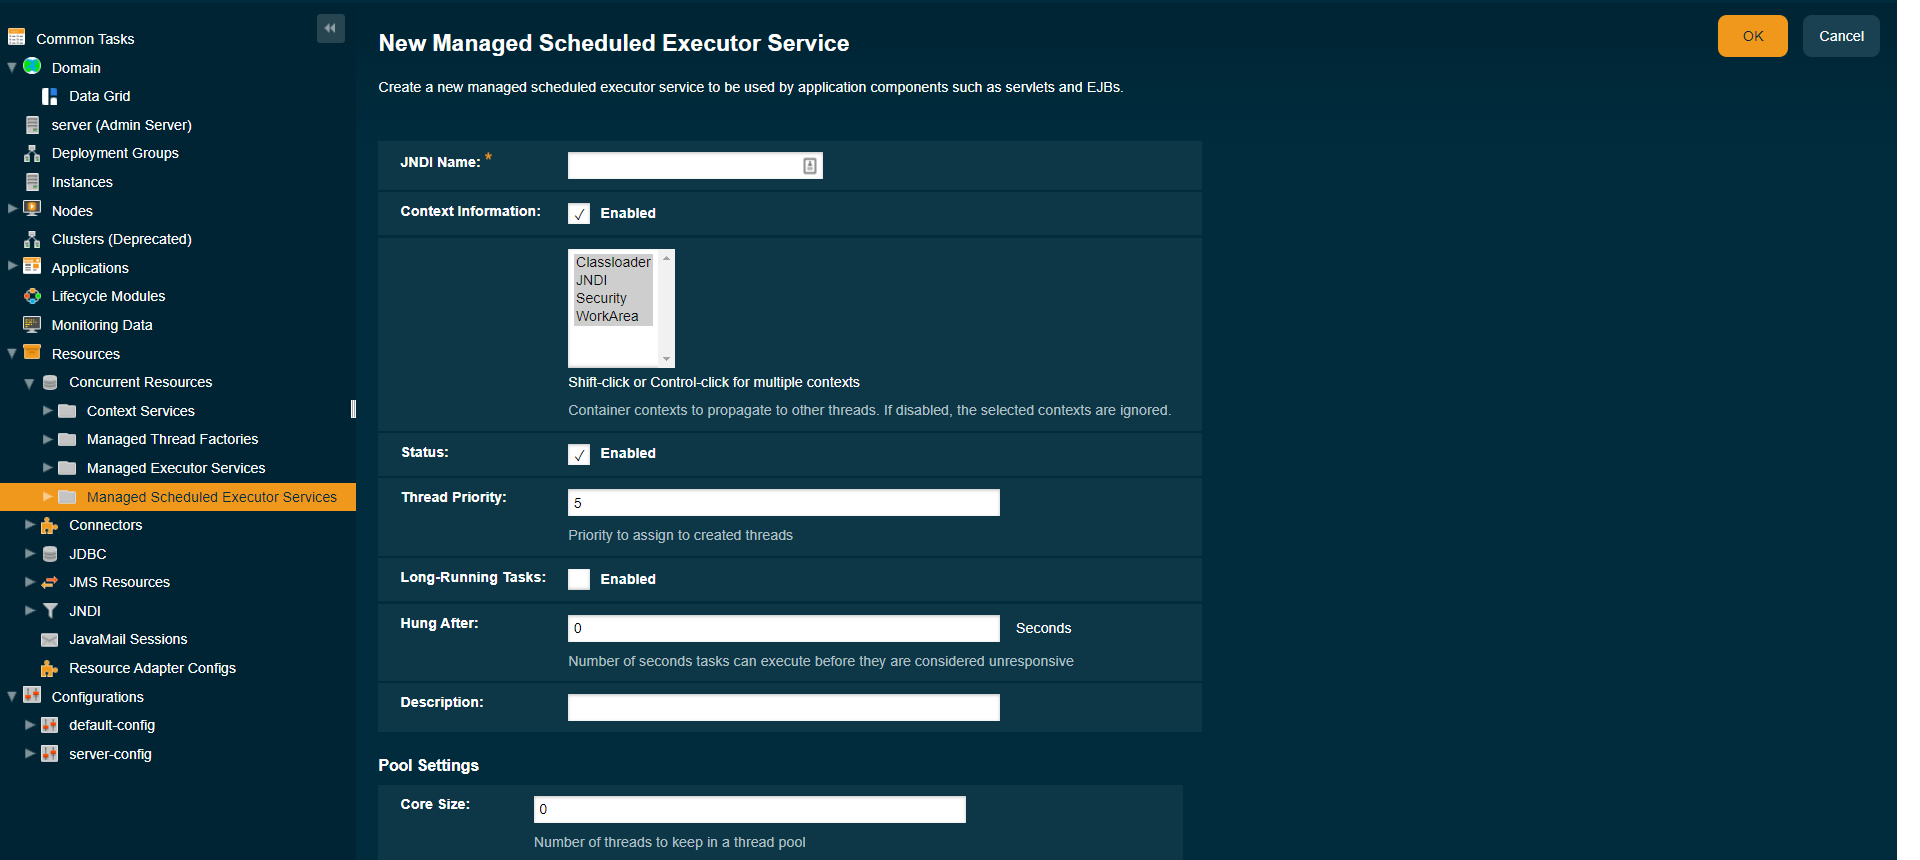 New Managed Scheduled Executor Service